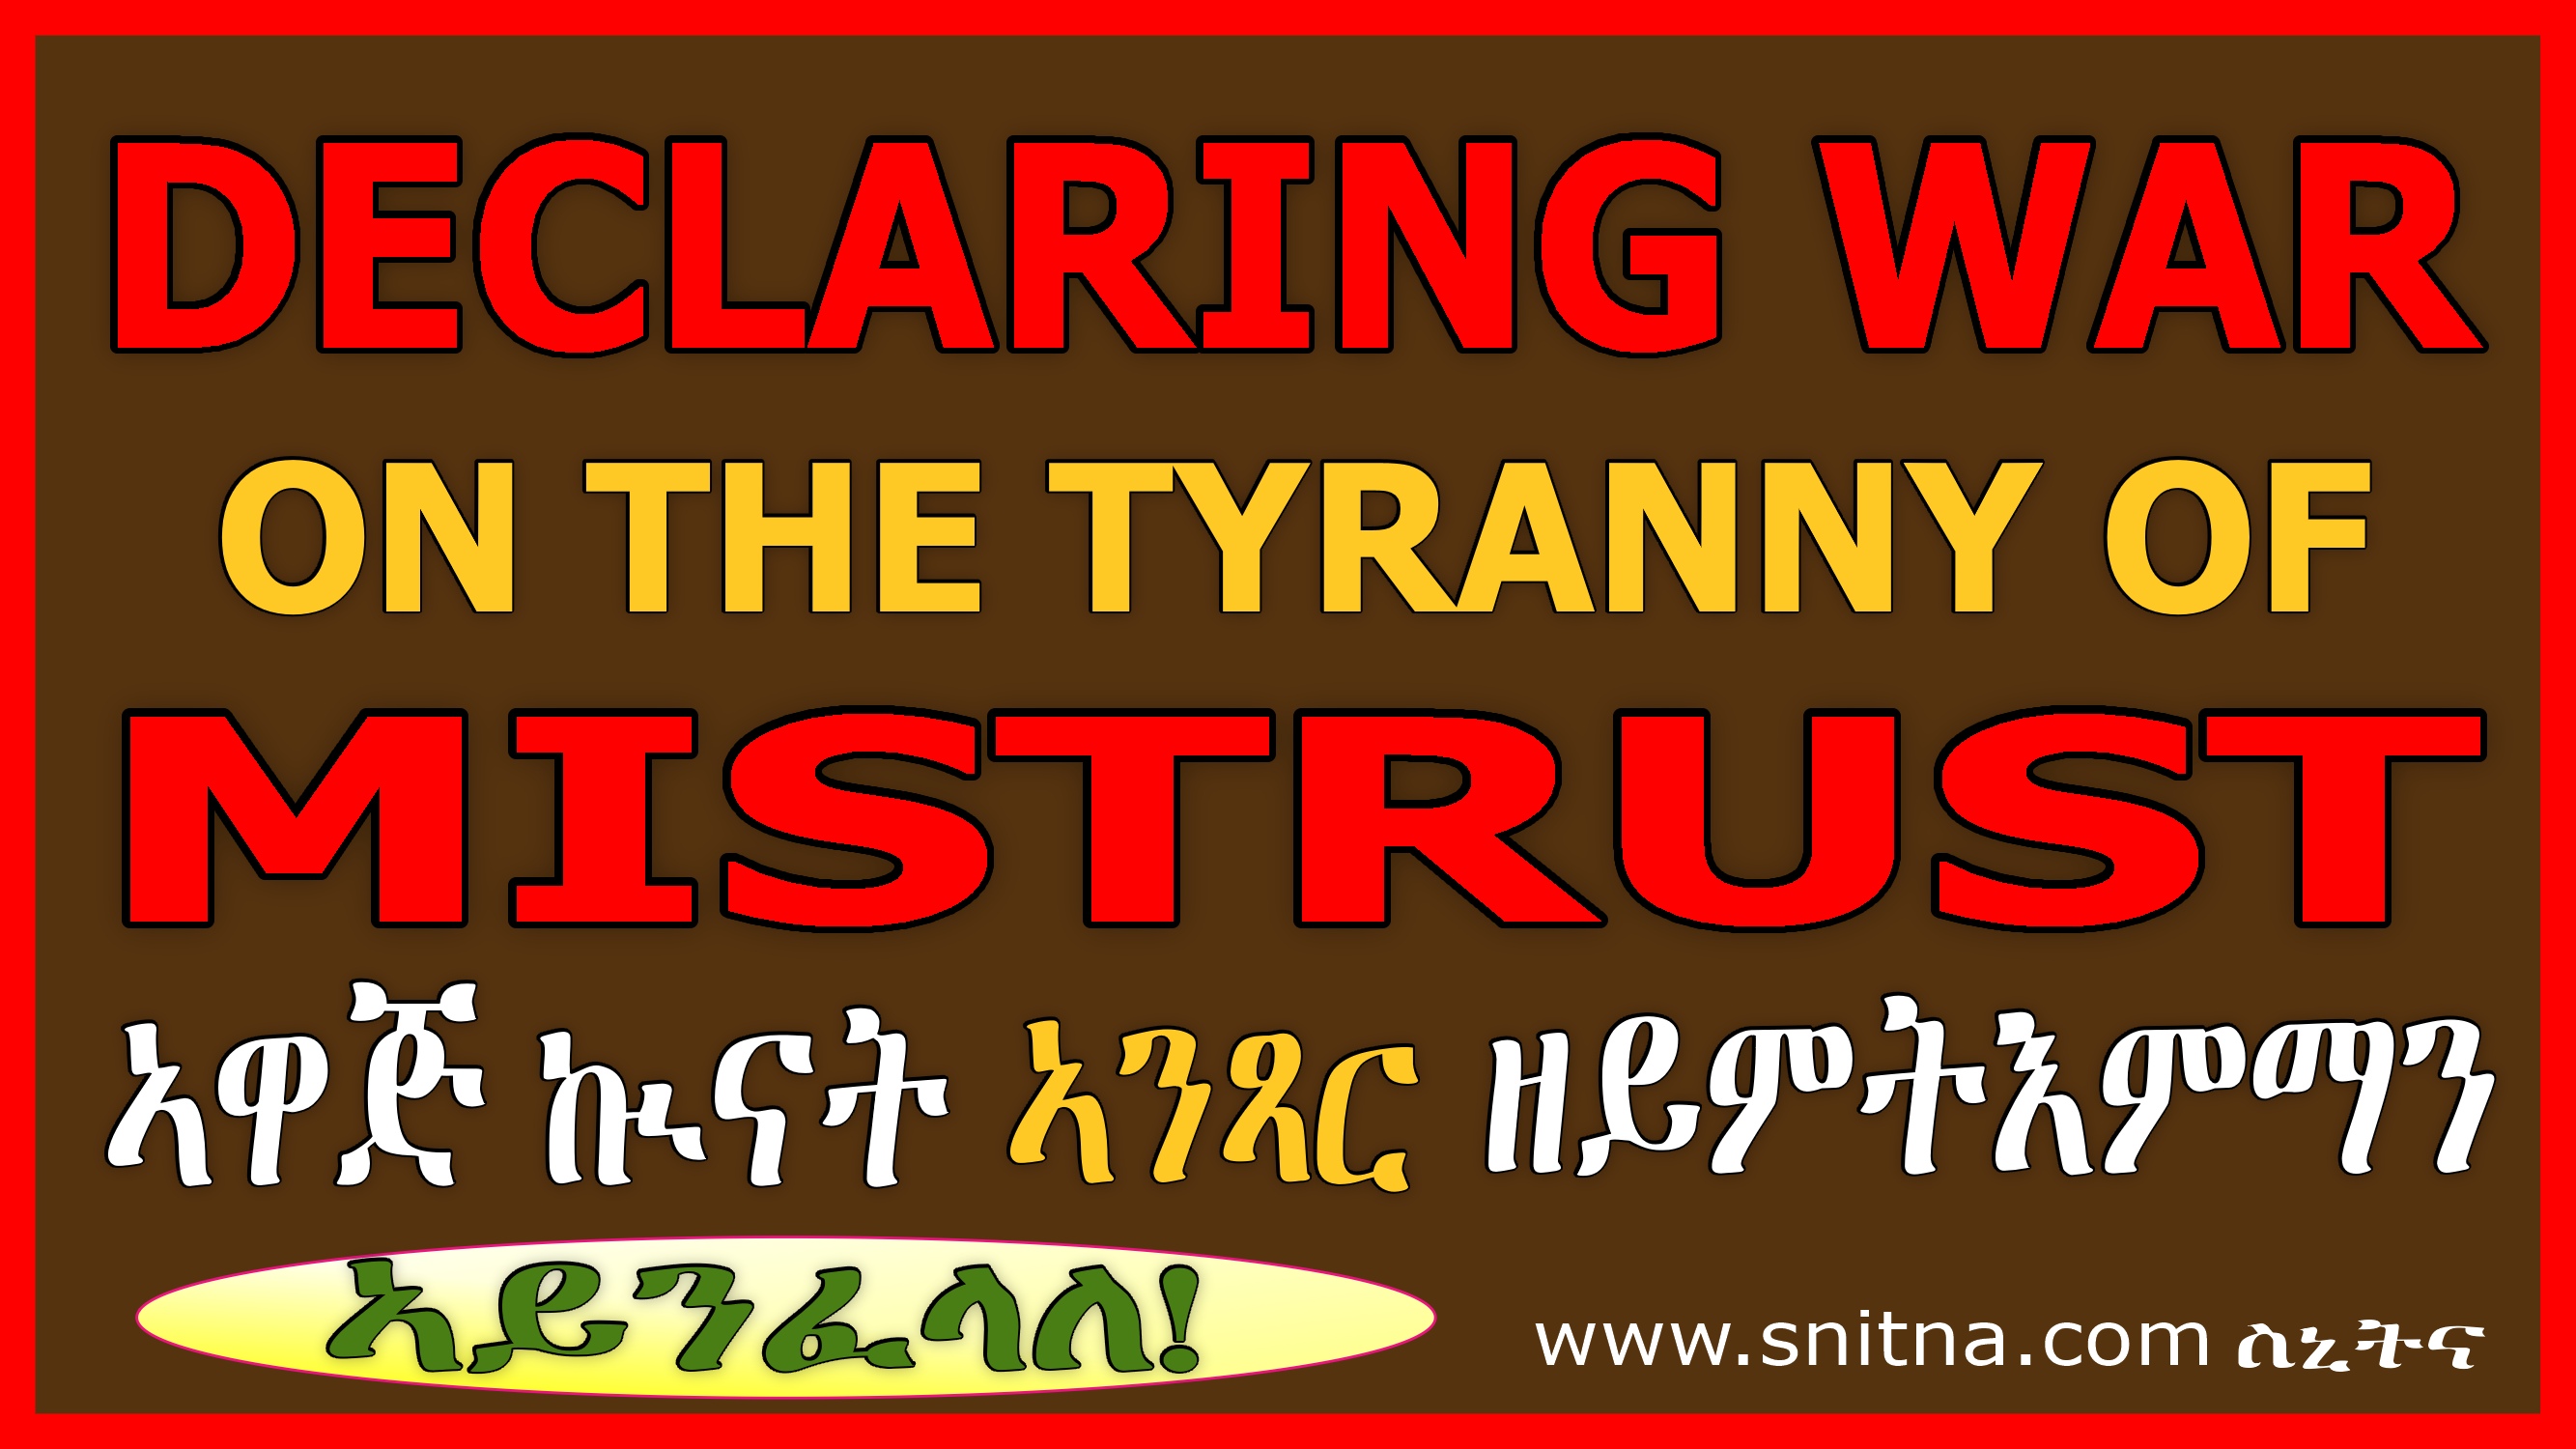 DECLARING WAR ON THE TYRANNY OF MISTRUST - THE ONLY WAY TO SHORTEN THE STRUGGLE AGAINST ERITREA’S RULING GANG